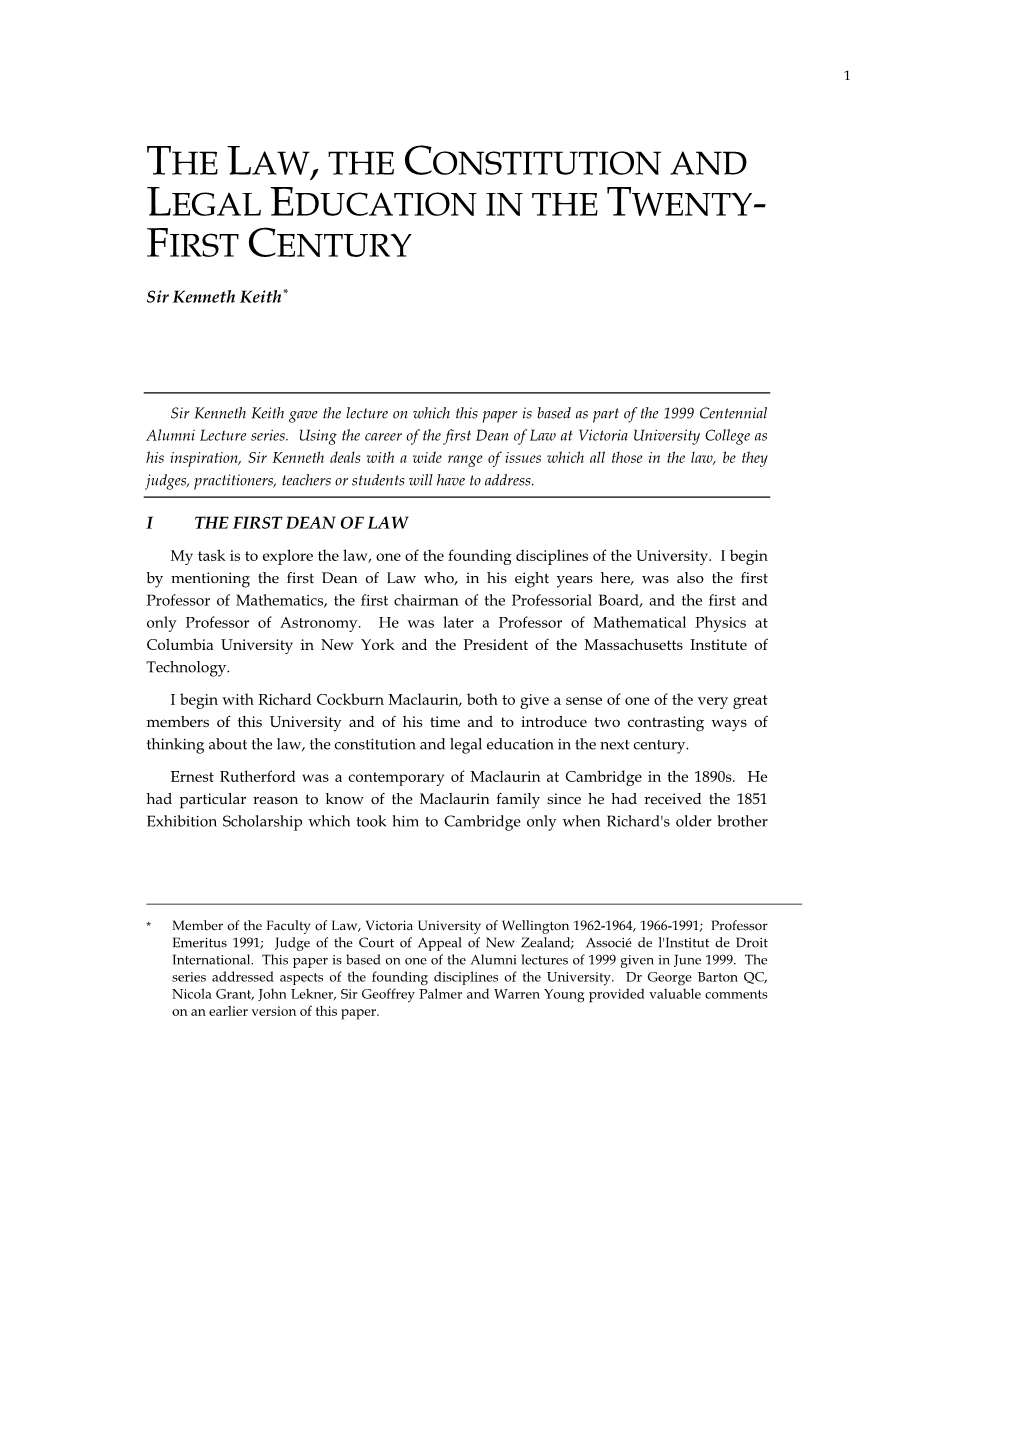 The Law, the Constitution and Legal Education in the Twenty-First Century 3